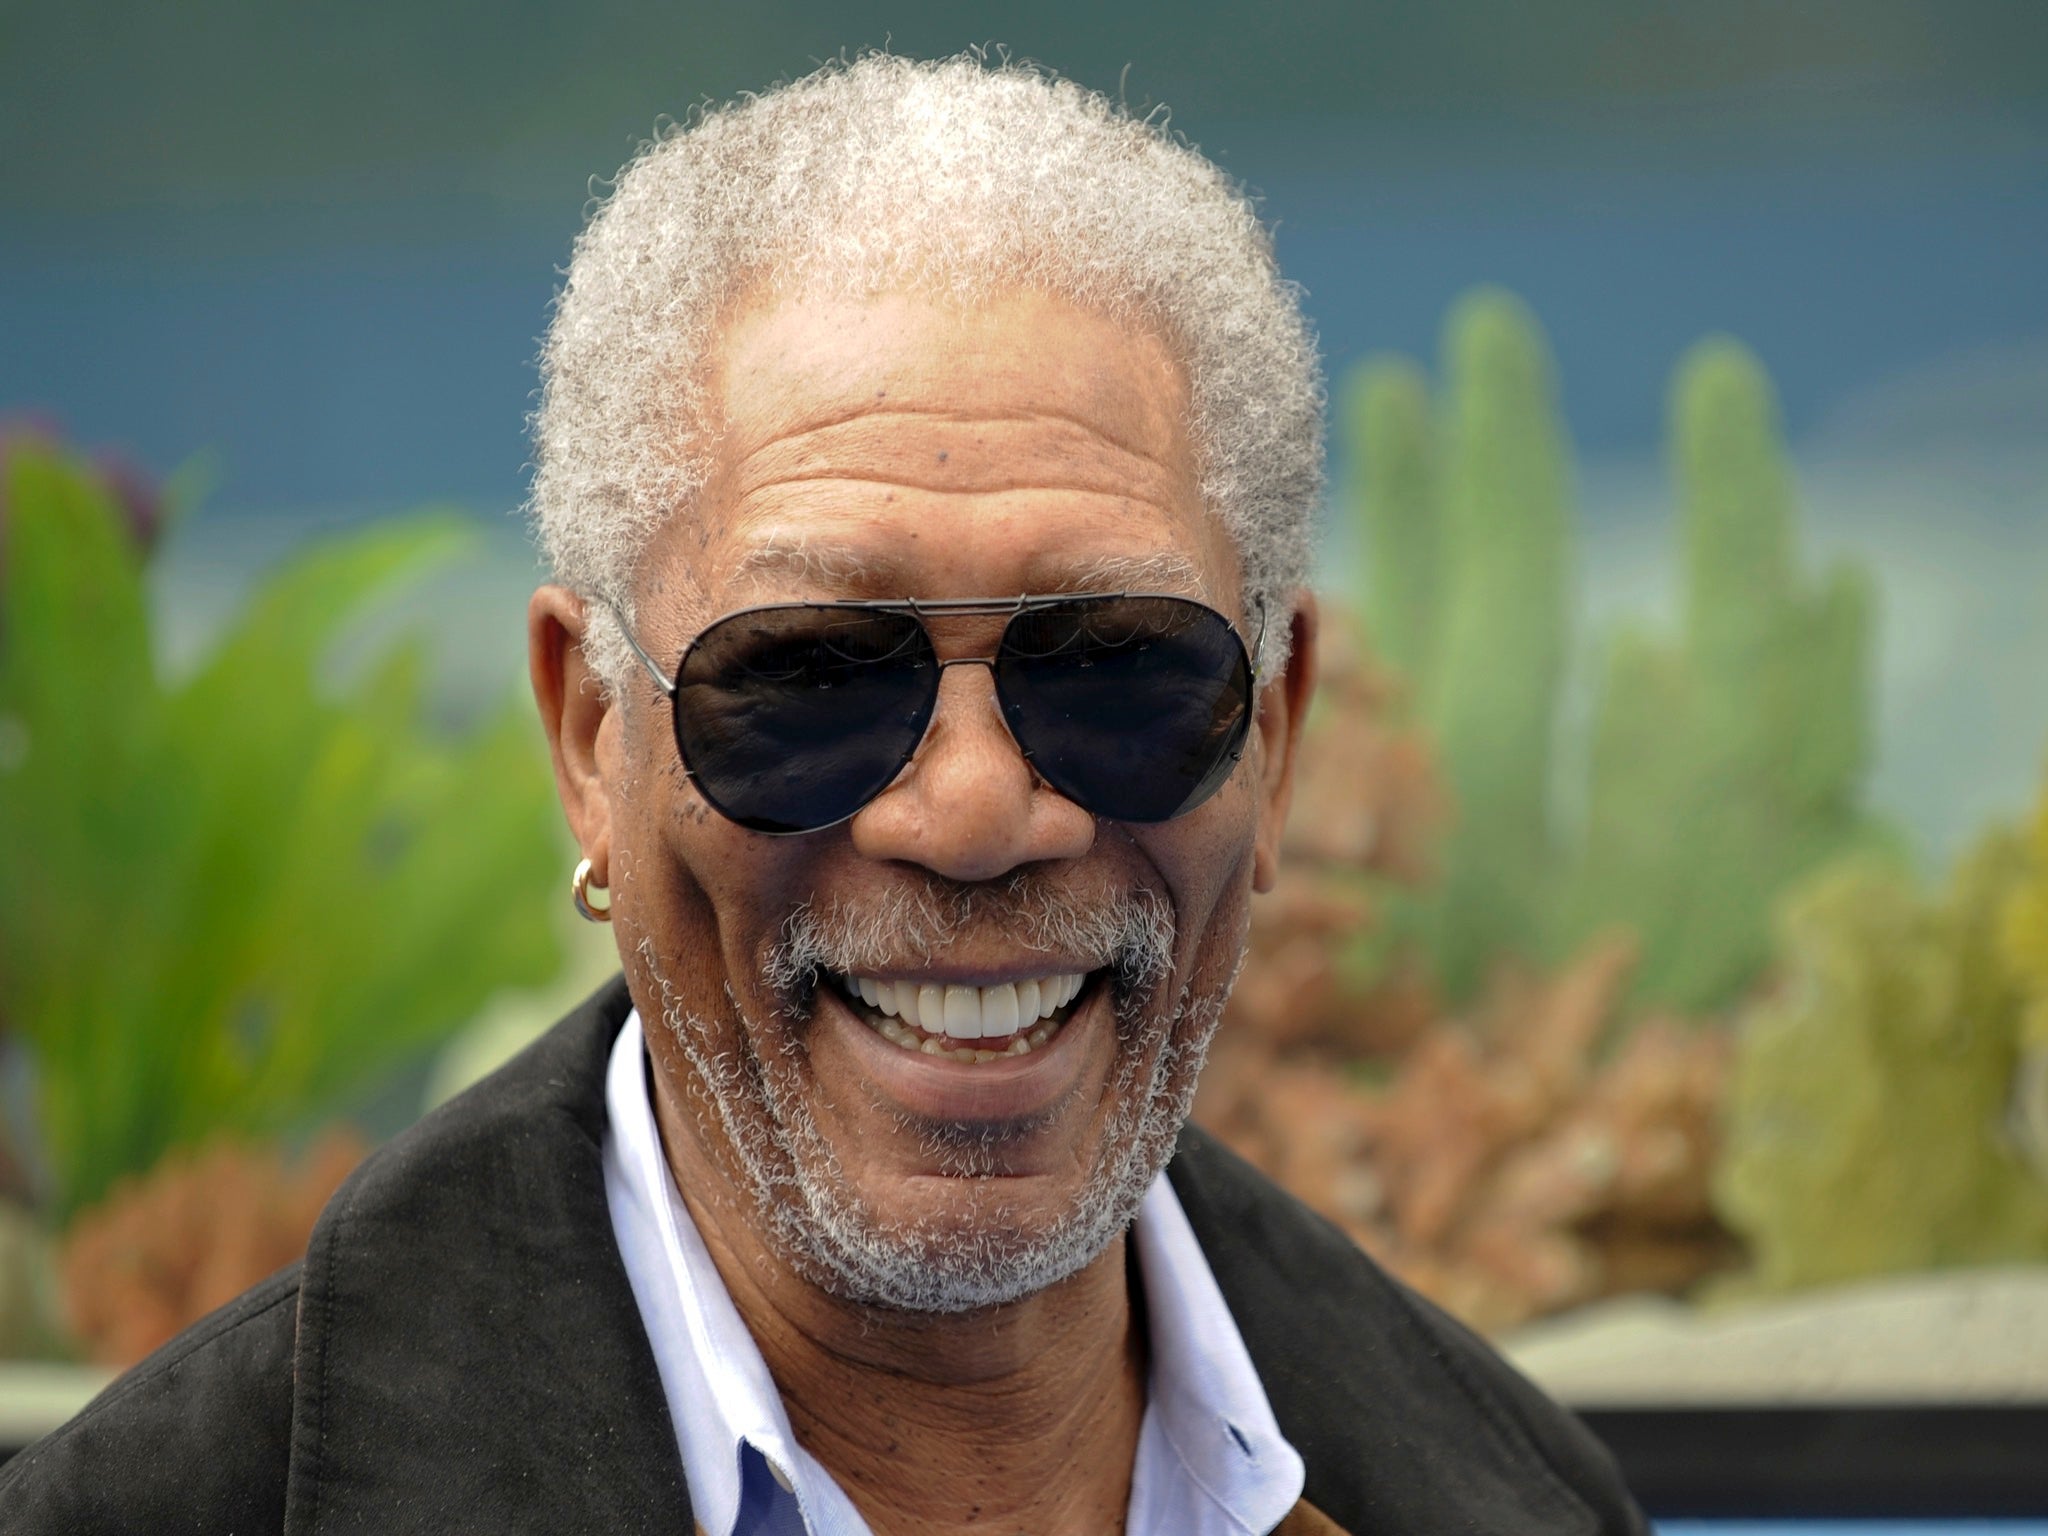 Morgan Freeman added his name to the letter calling for the flag's removal